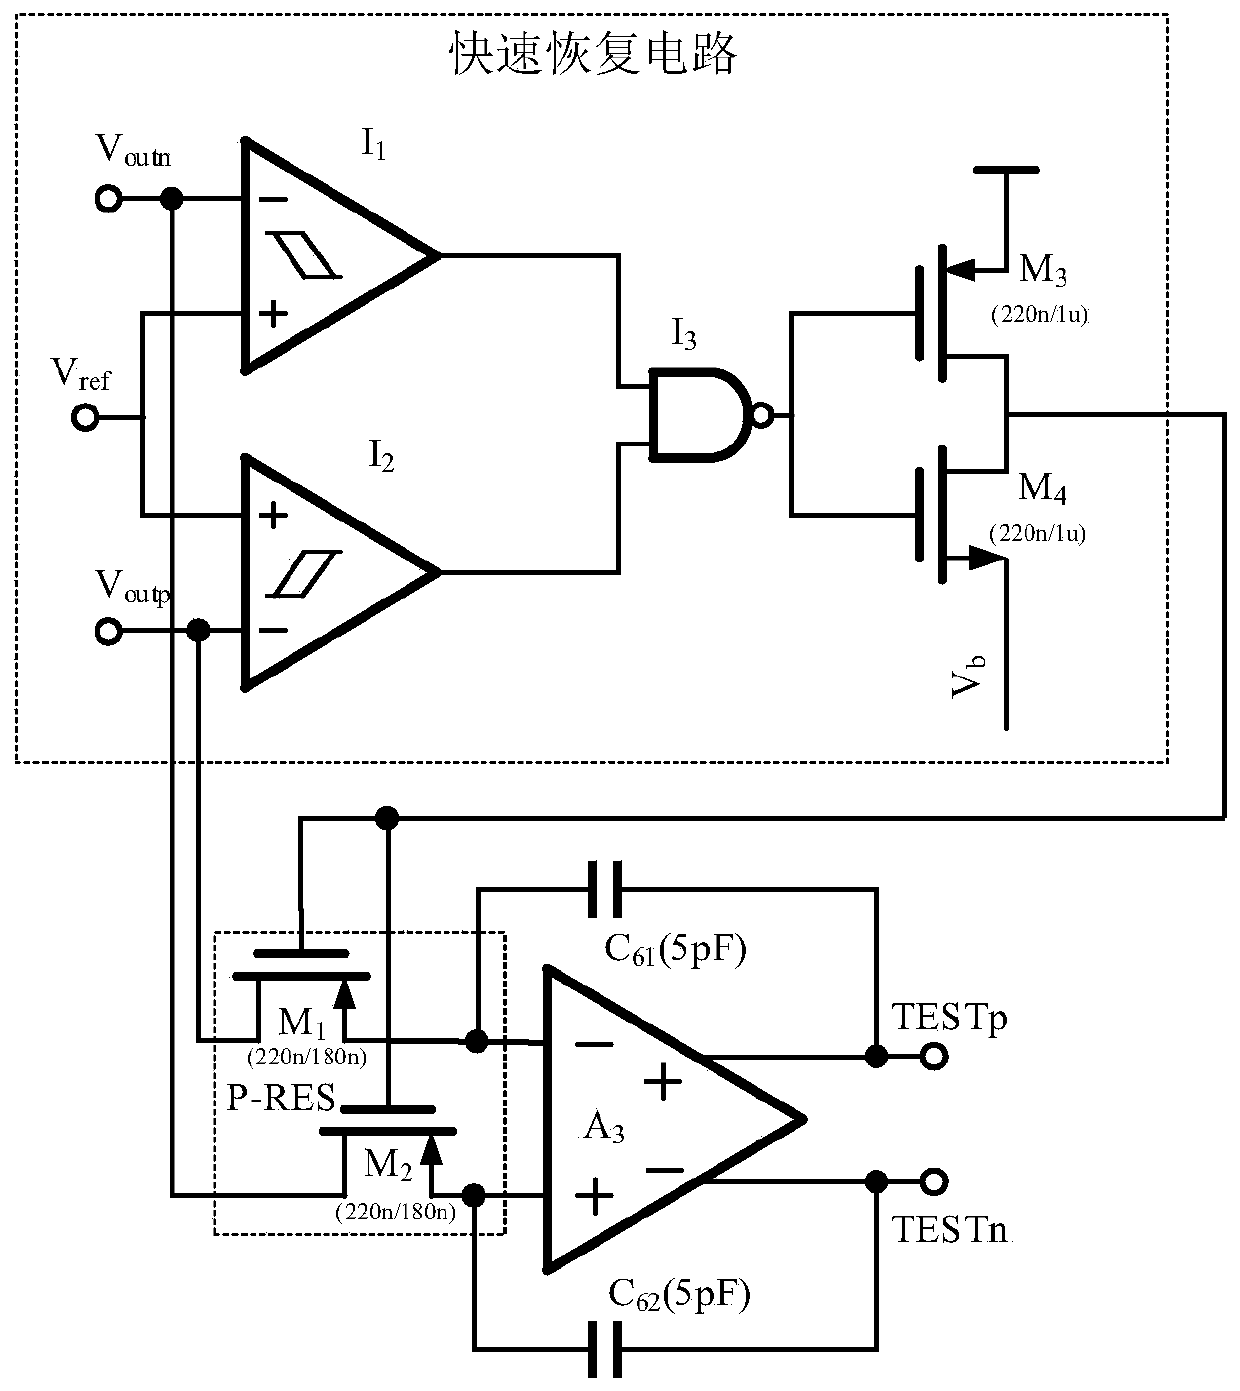 Low-noise high-input impedance amplifier applied to wearable dry electrode electrocardio monitoring